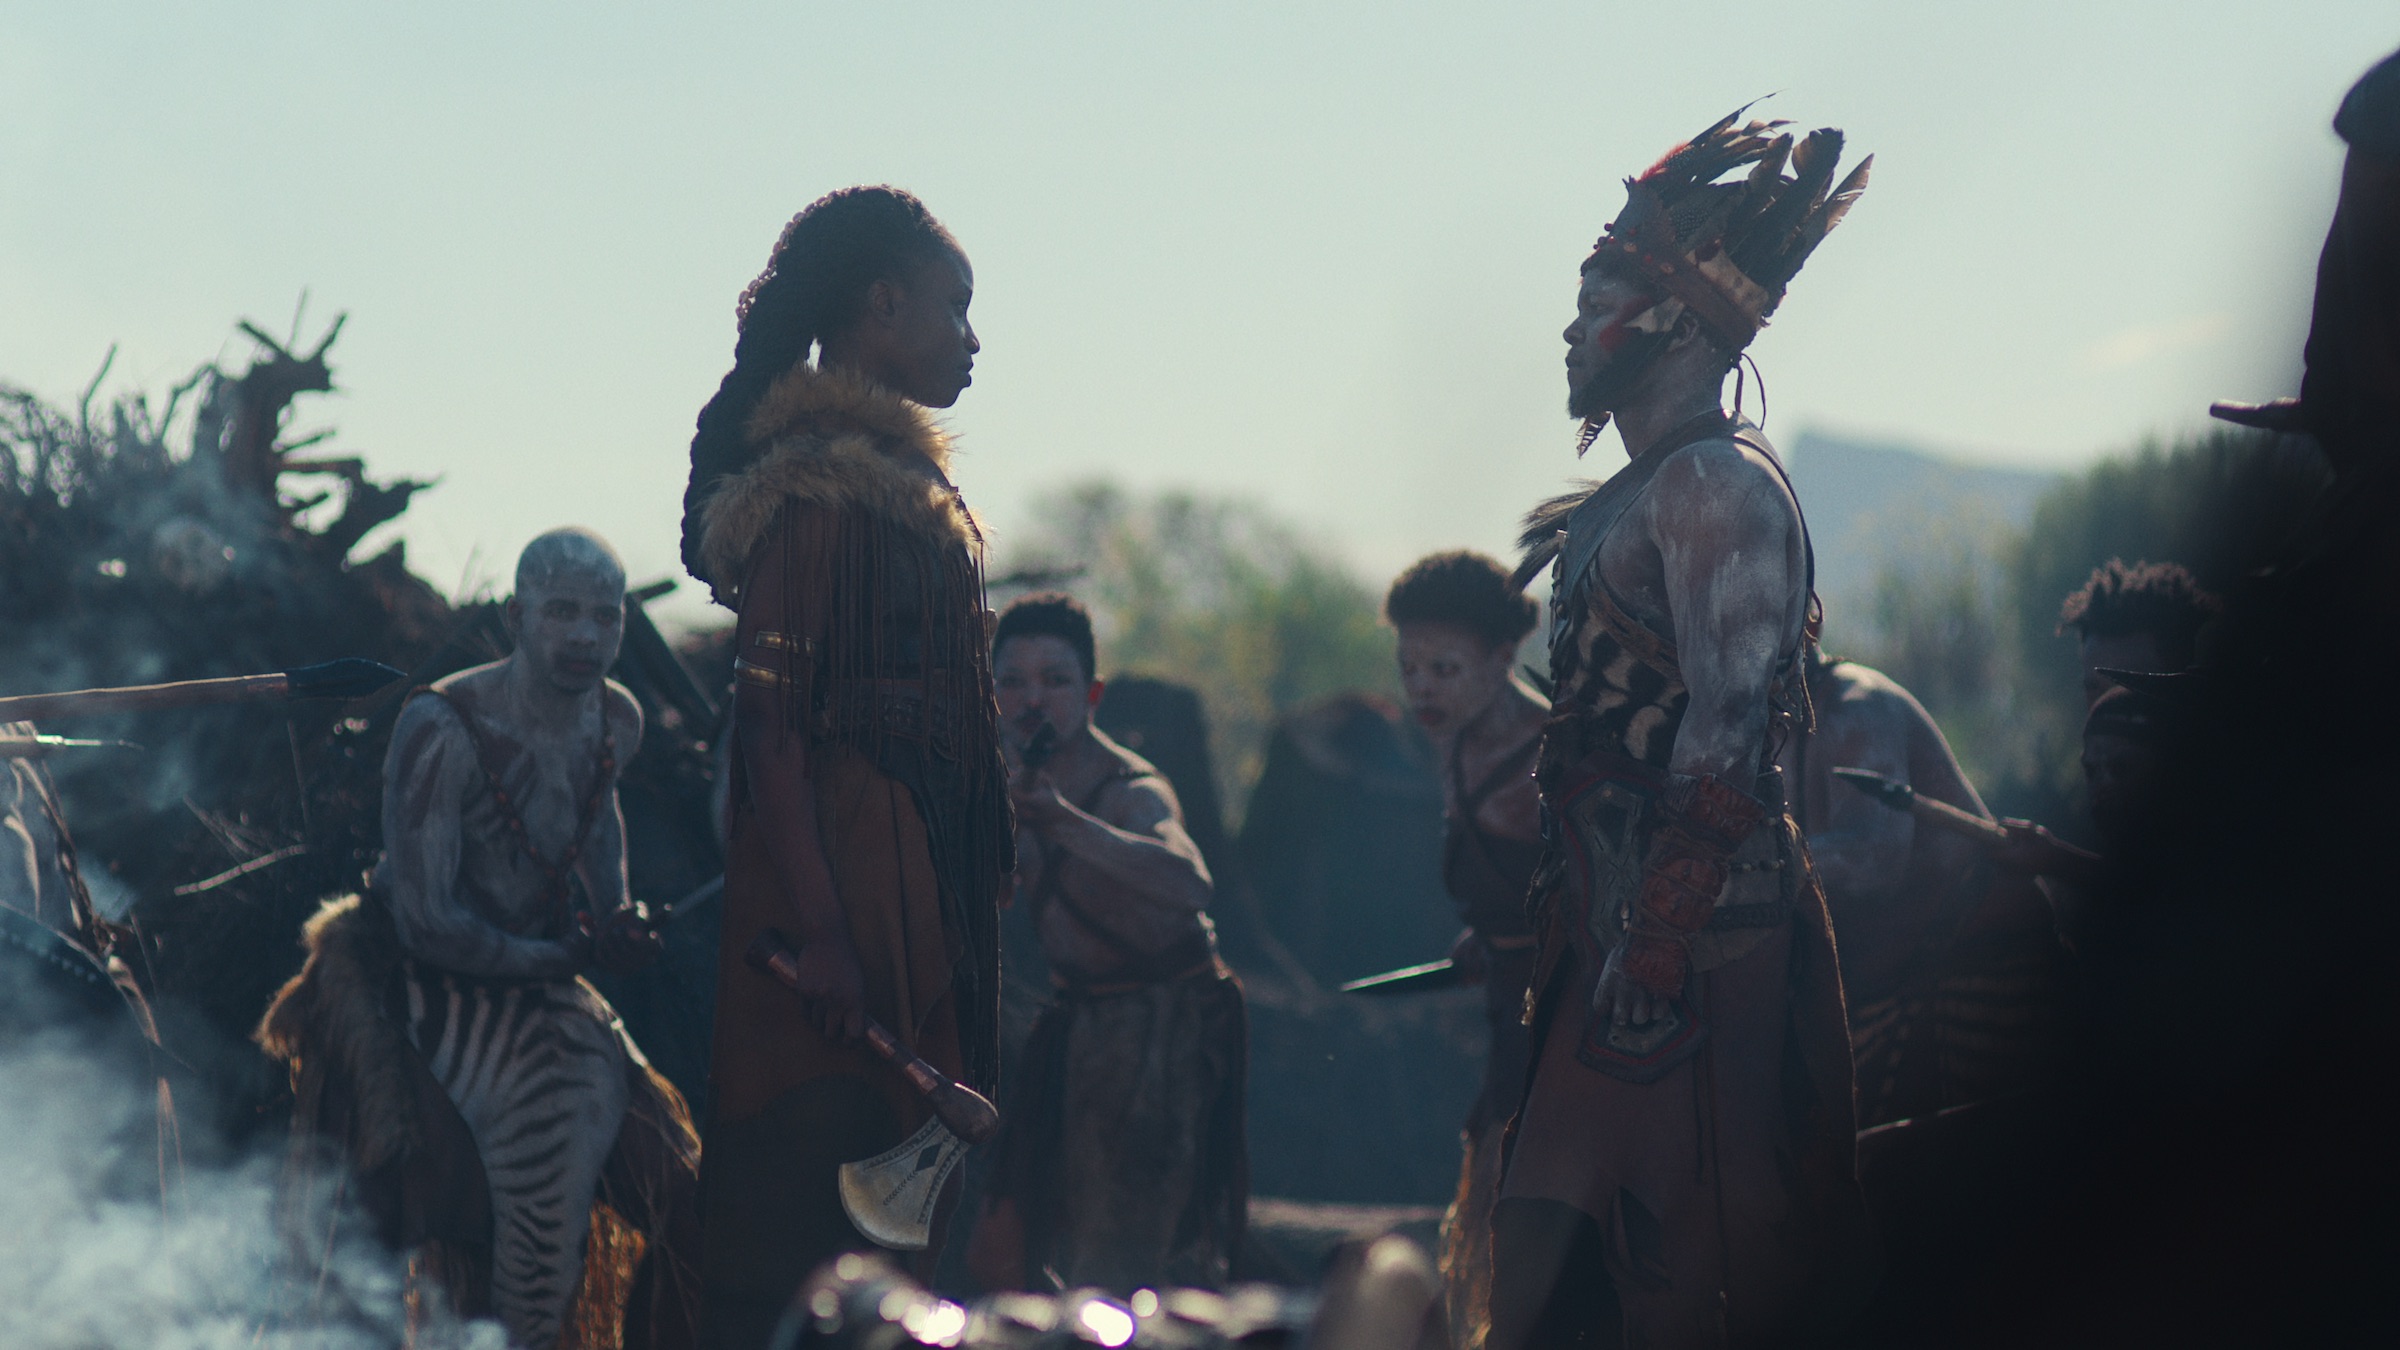 Njinga and Kasa stare at each other, face-to-face, surrounded by Imbangala warriors with weapons drawn.